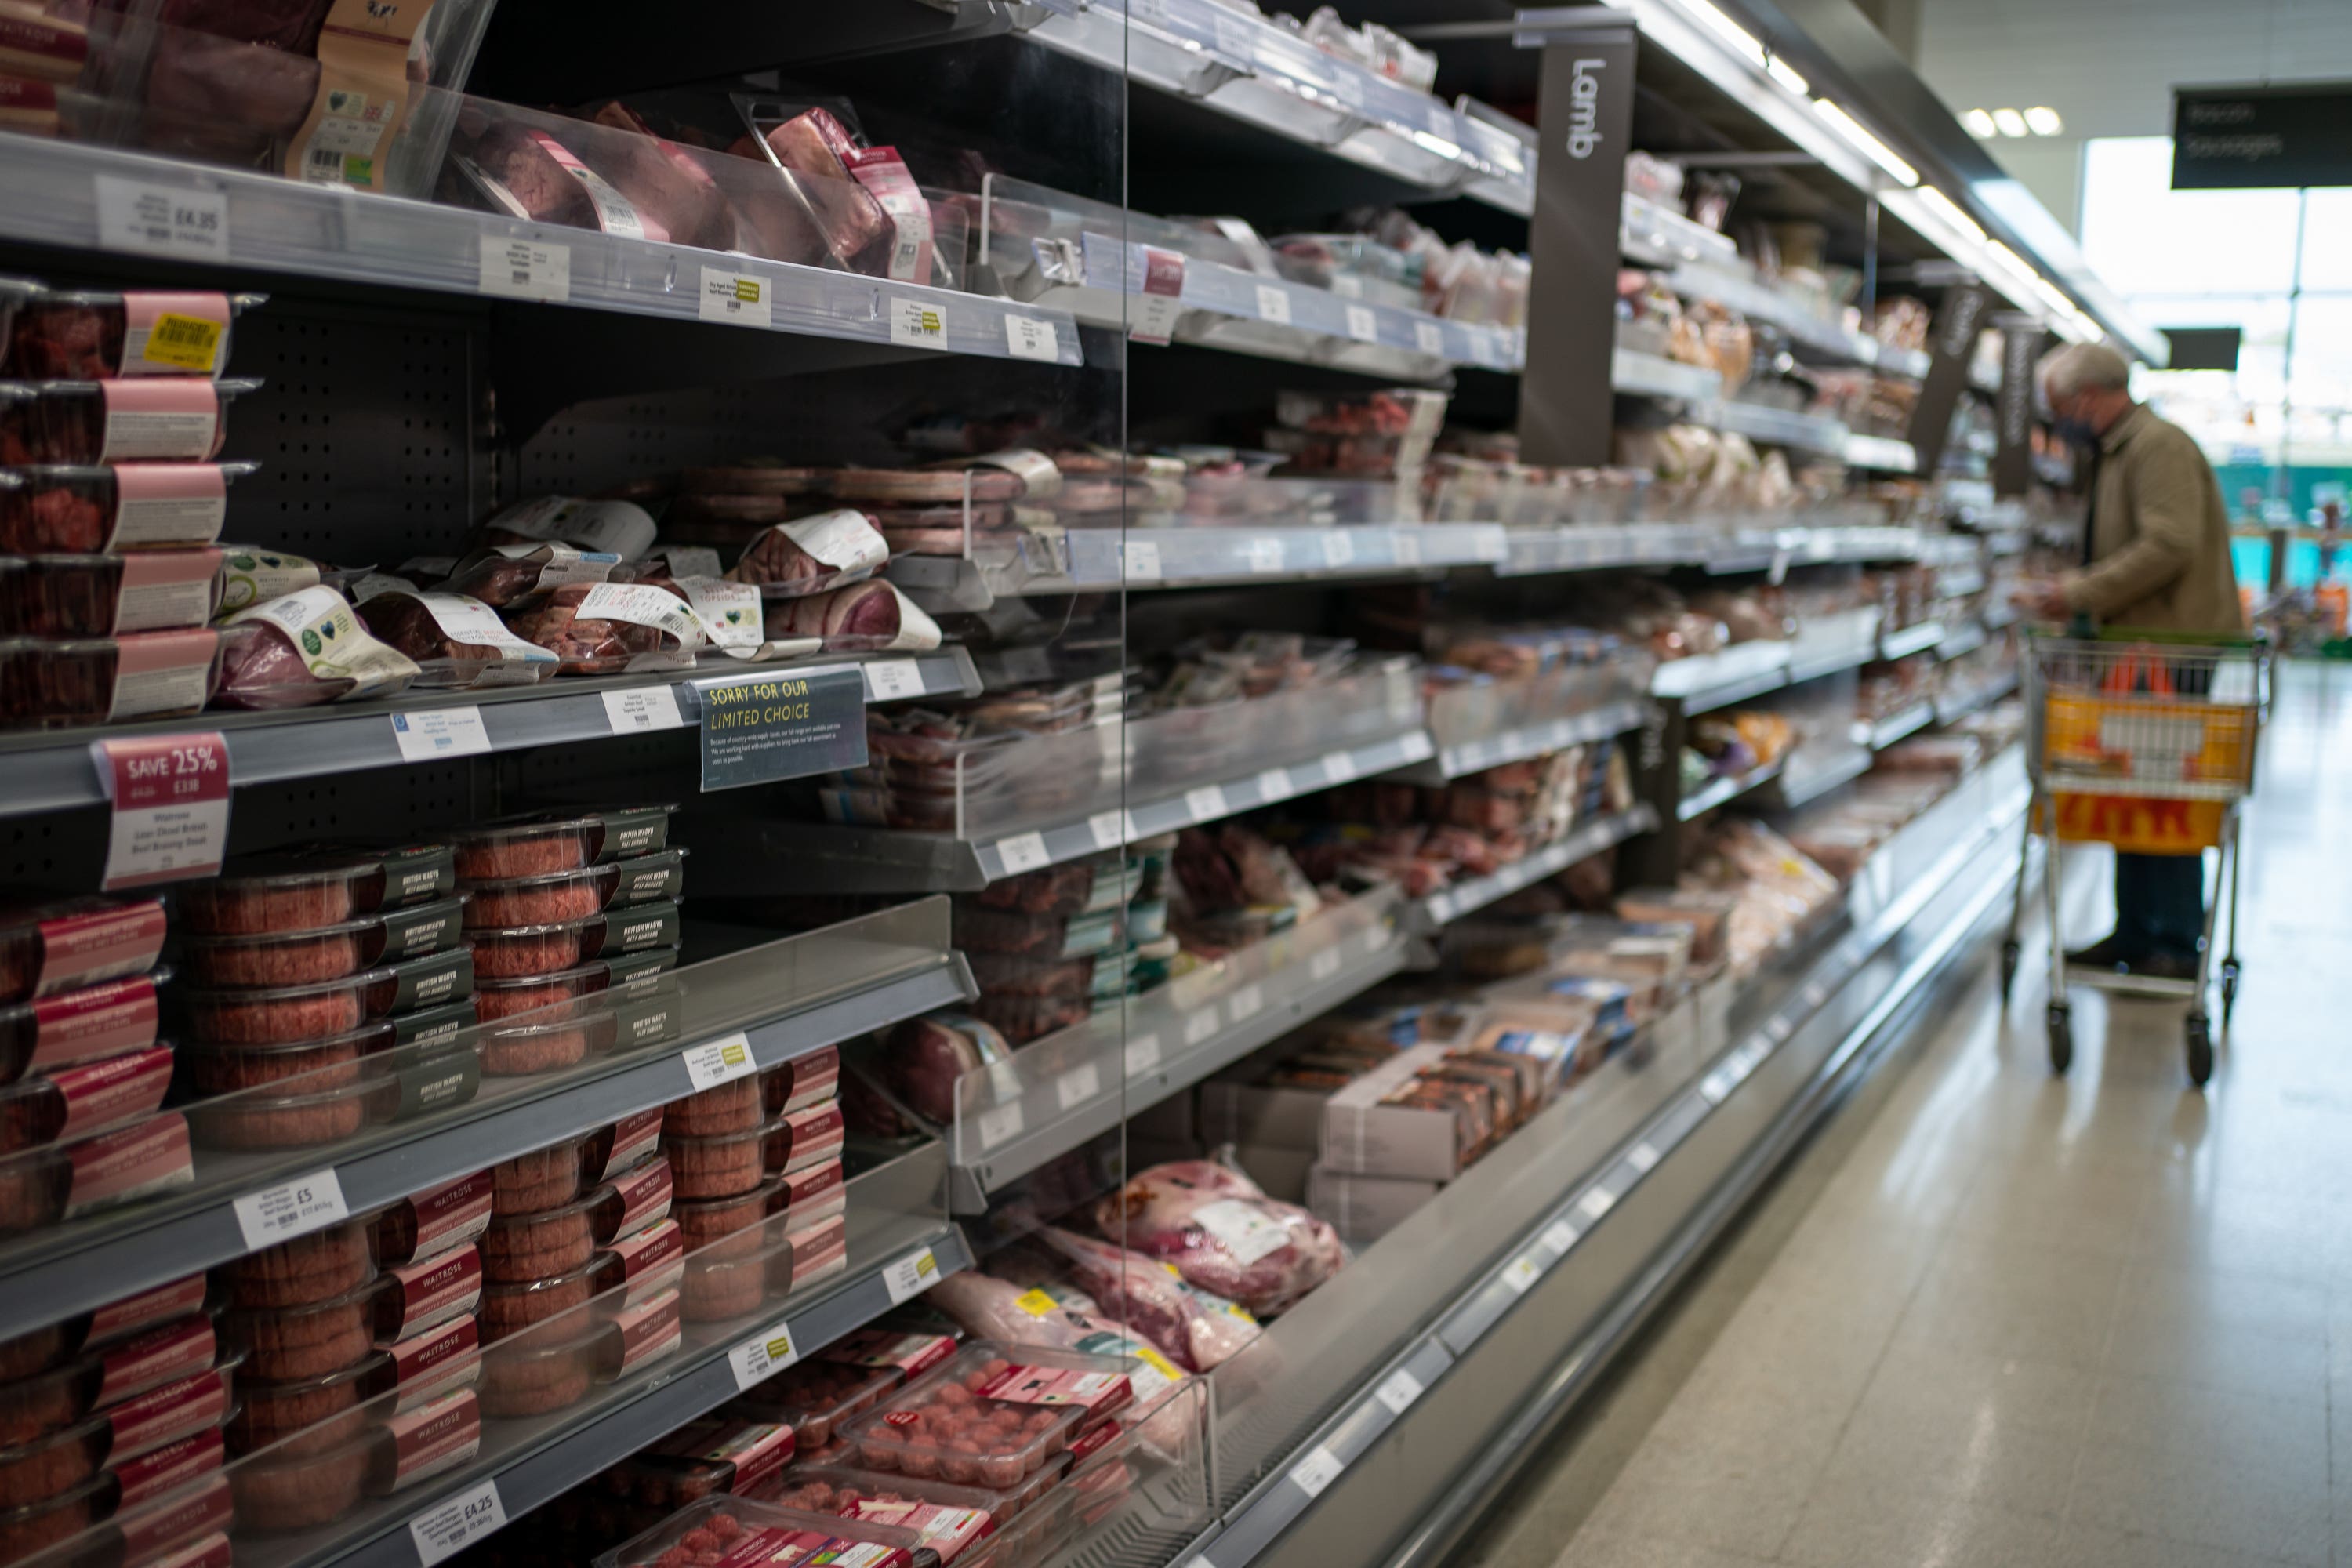 Food prices continue to rise alongside energy bills